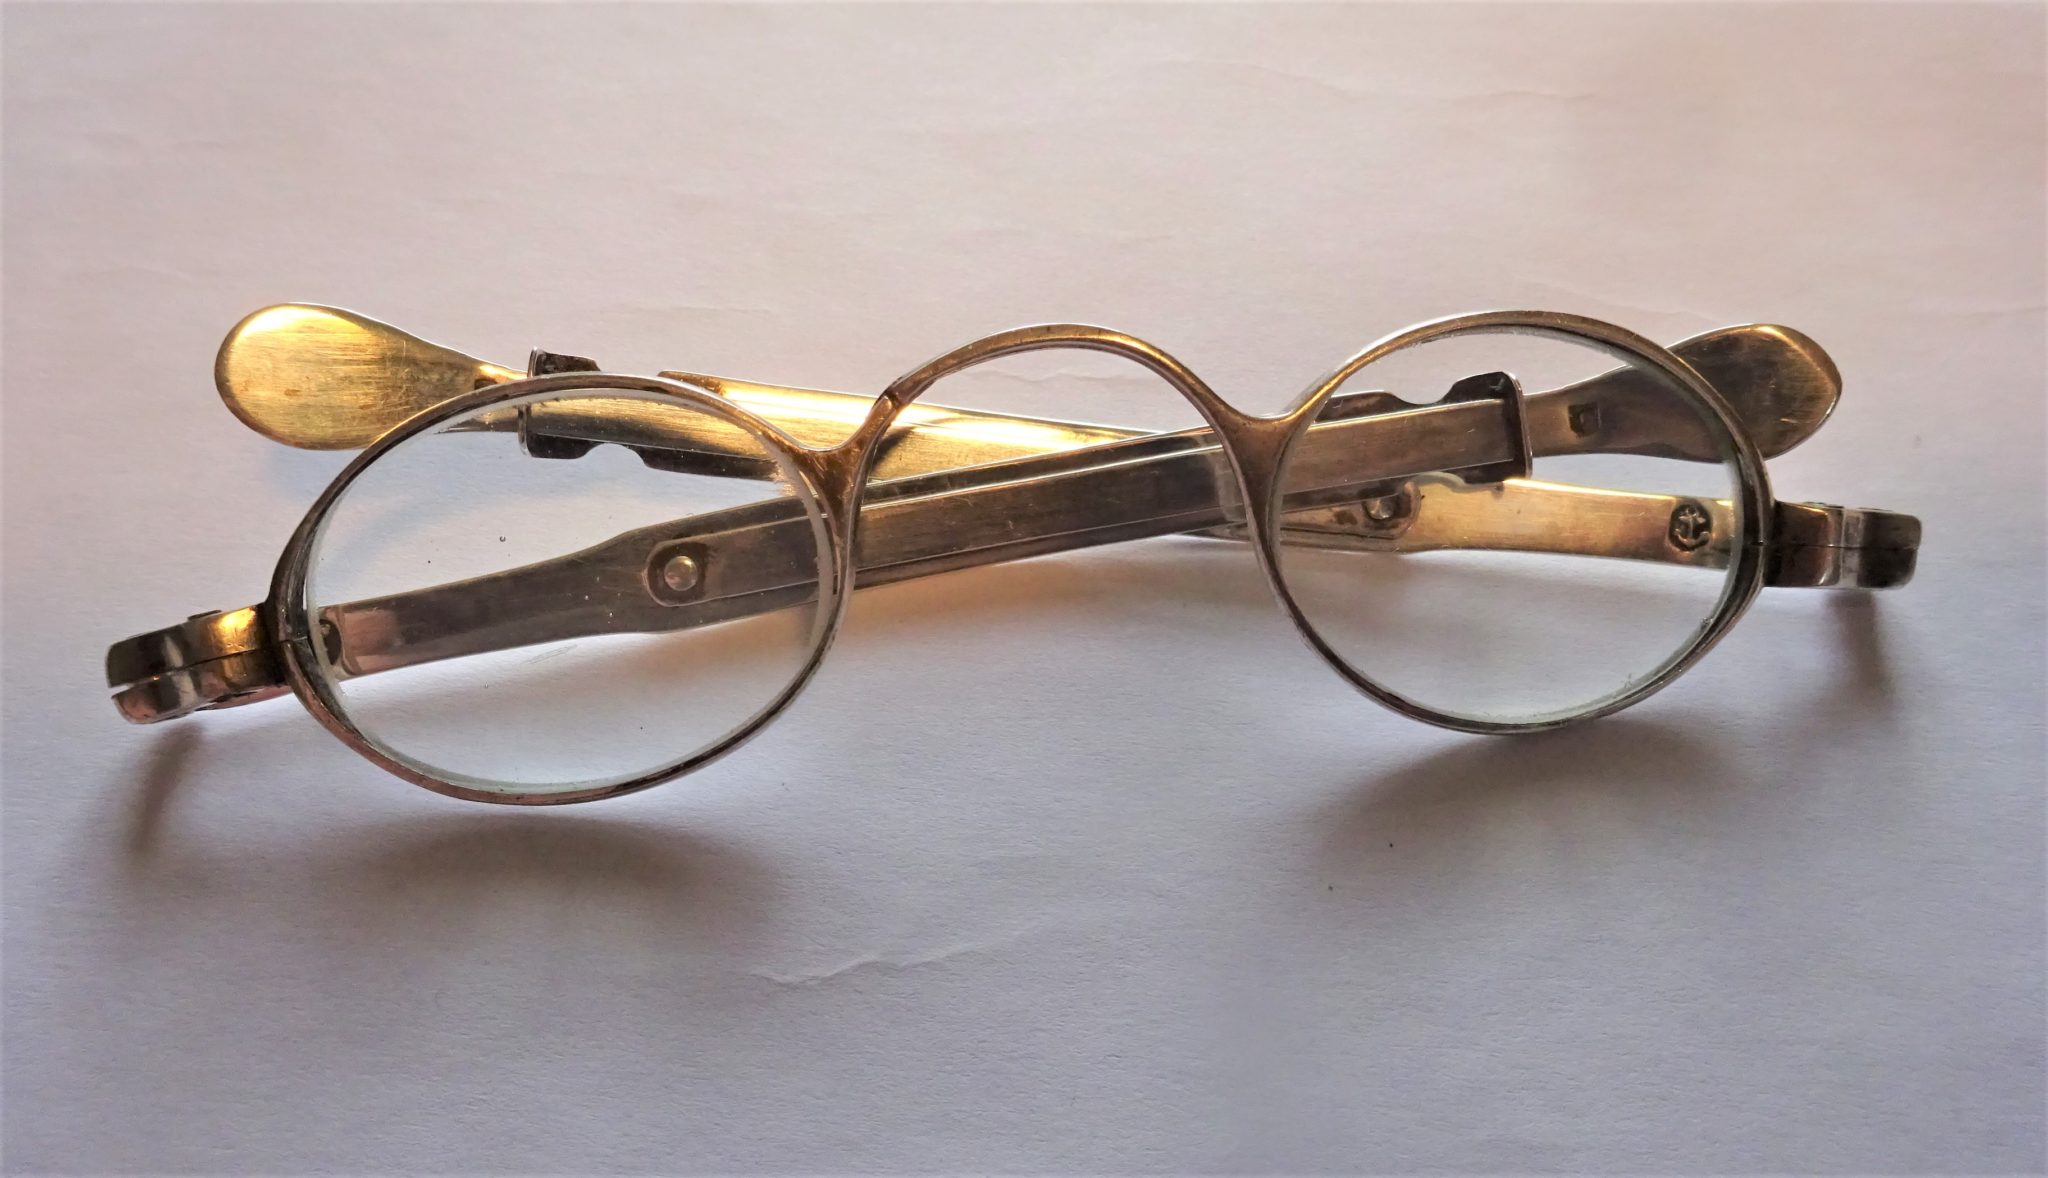 SILVER SPECTACLES